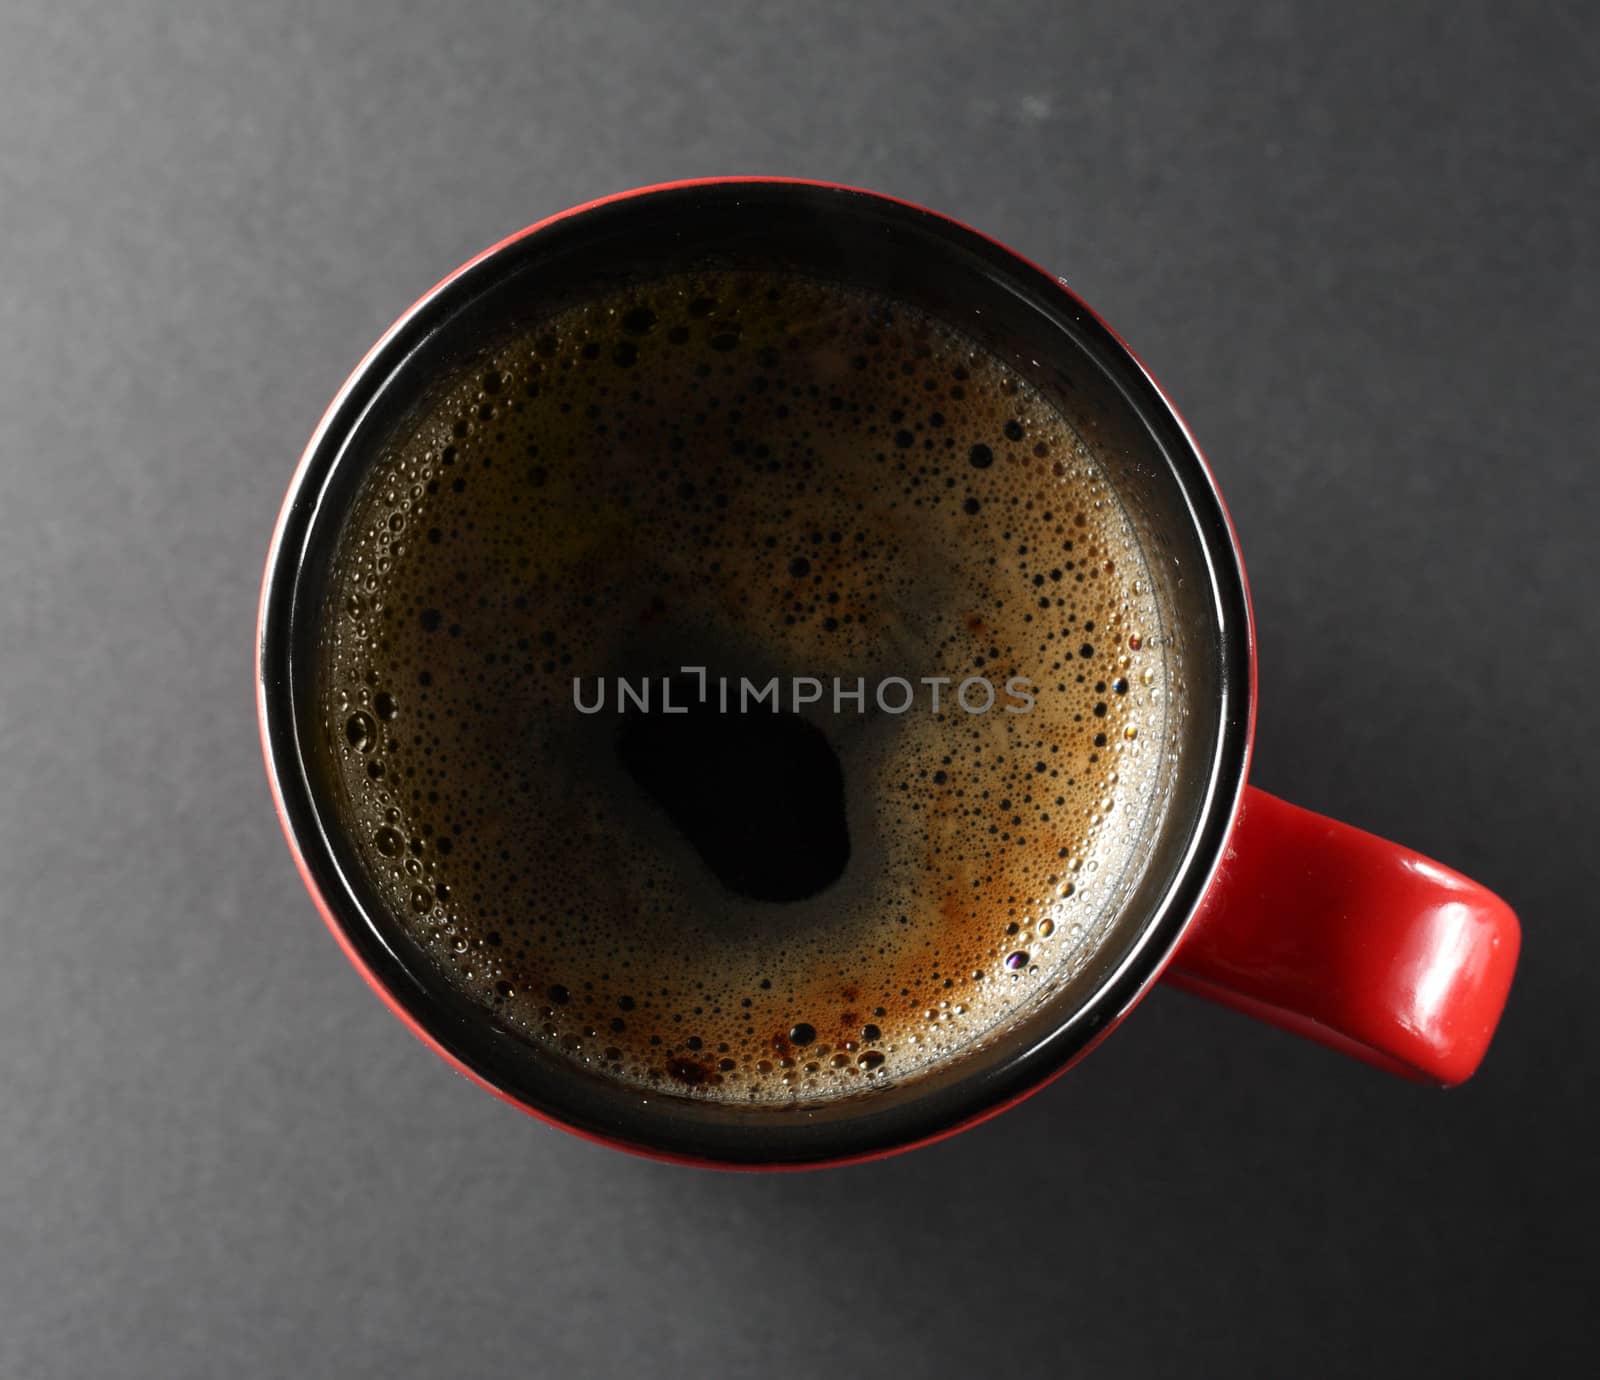 Cup of coffe from above view on a dark background